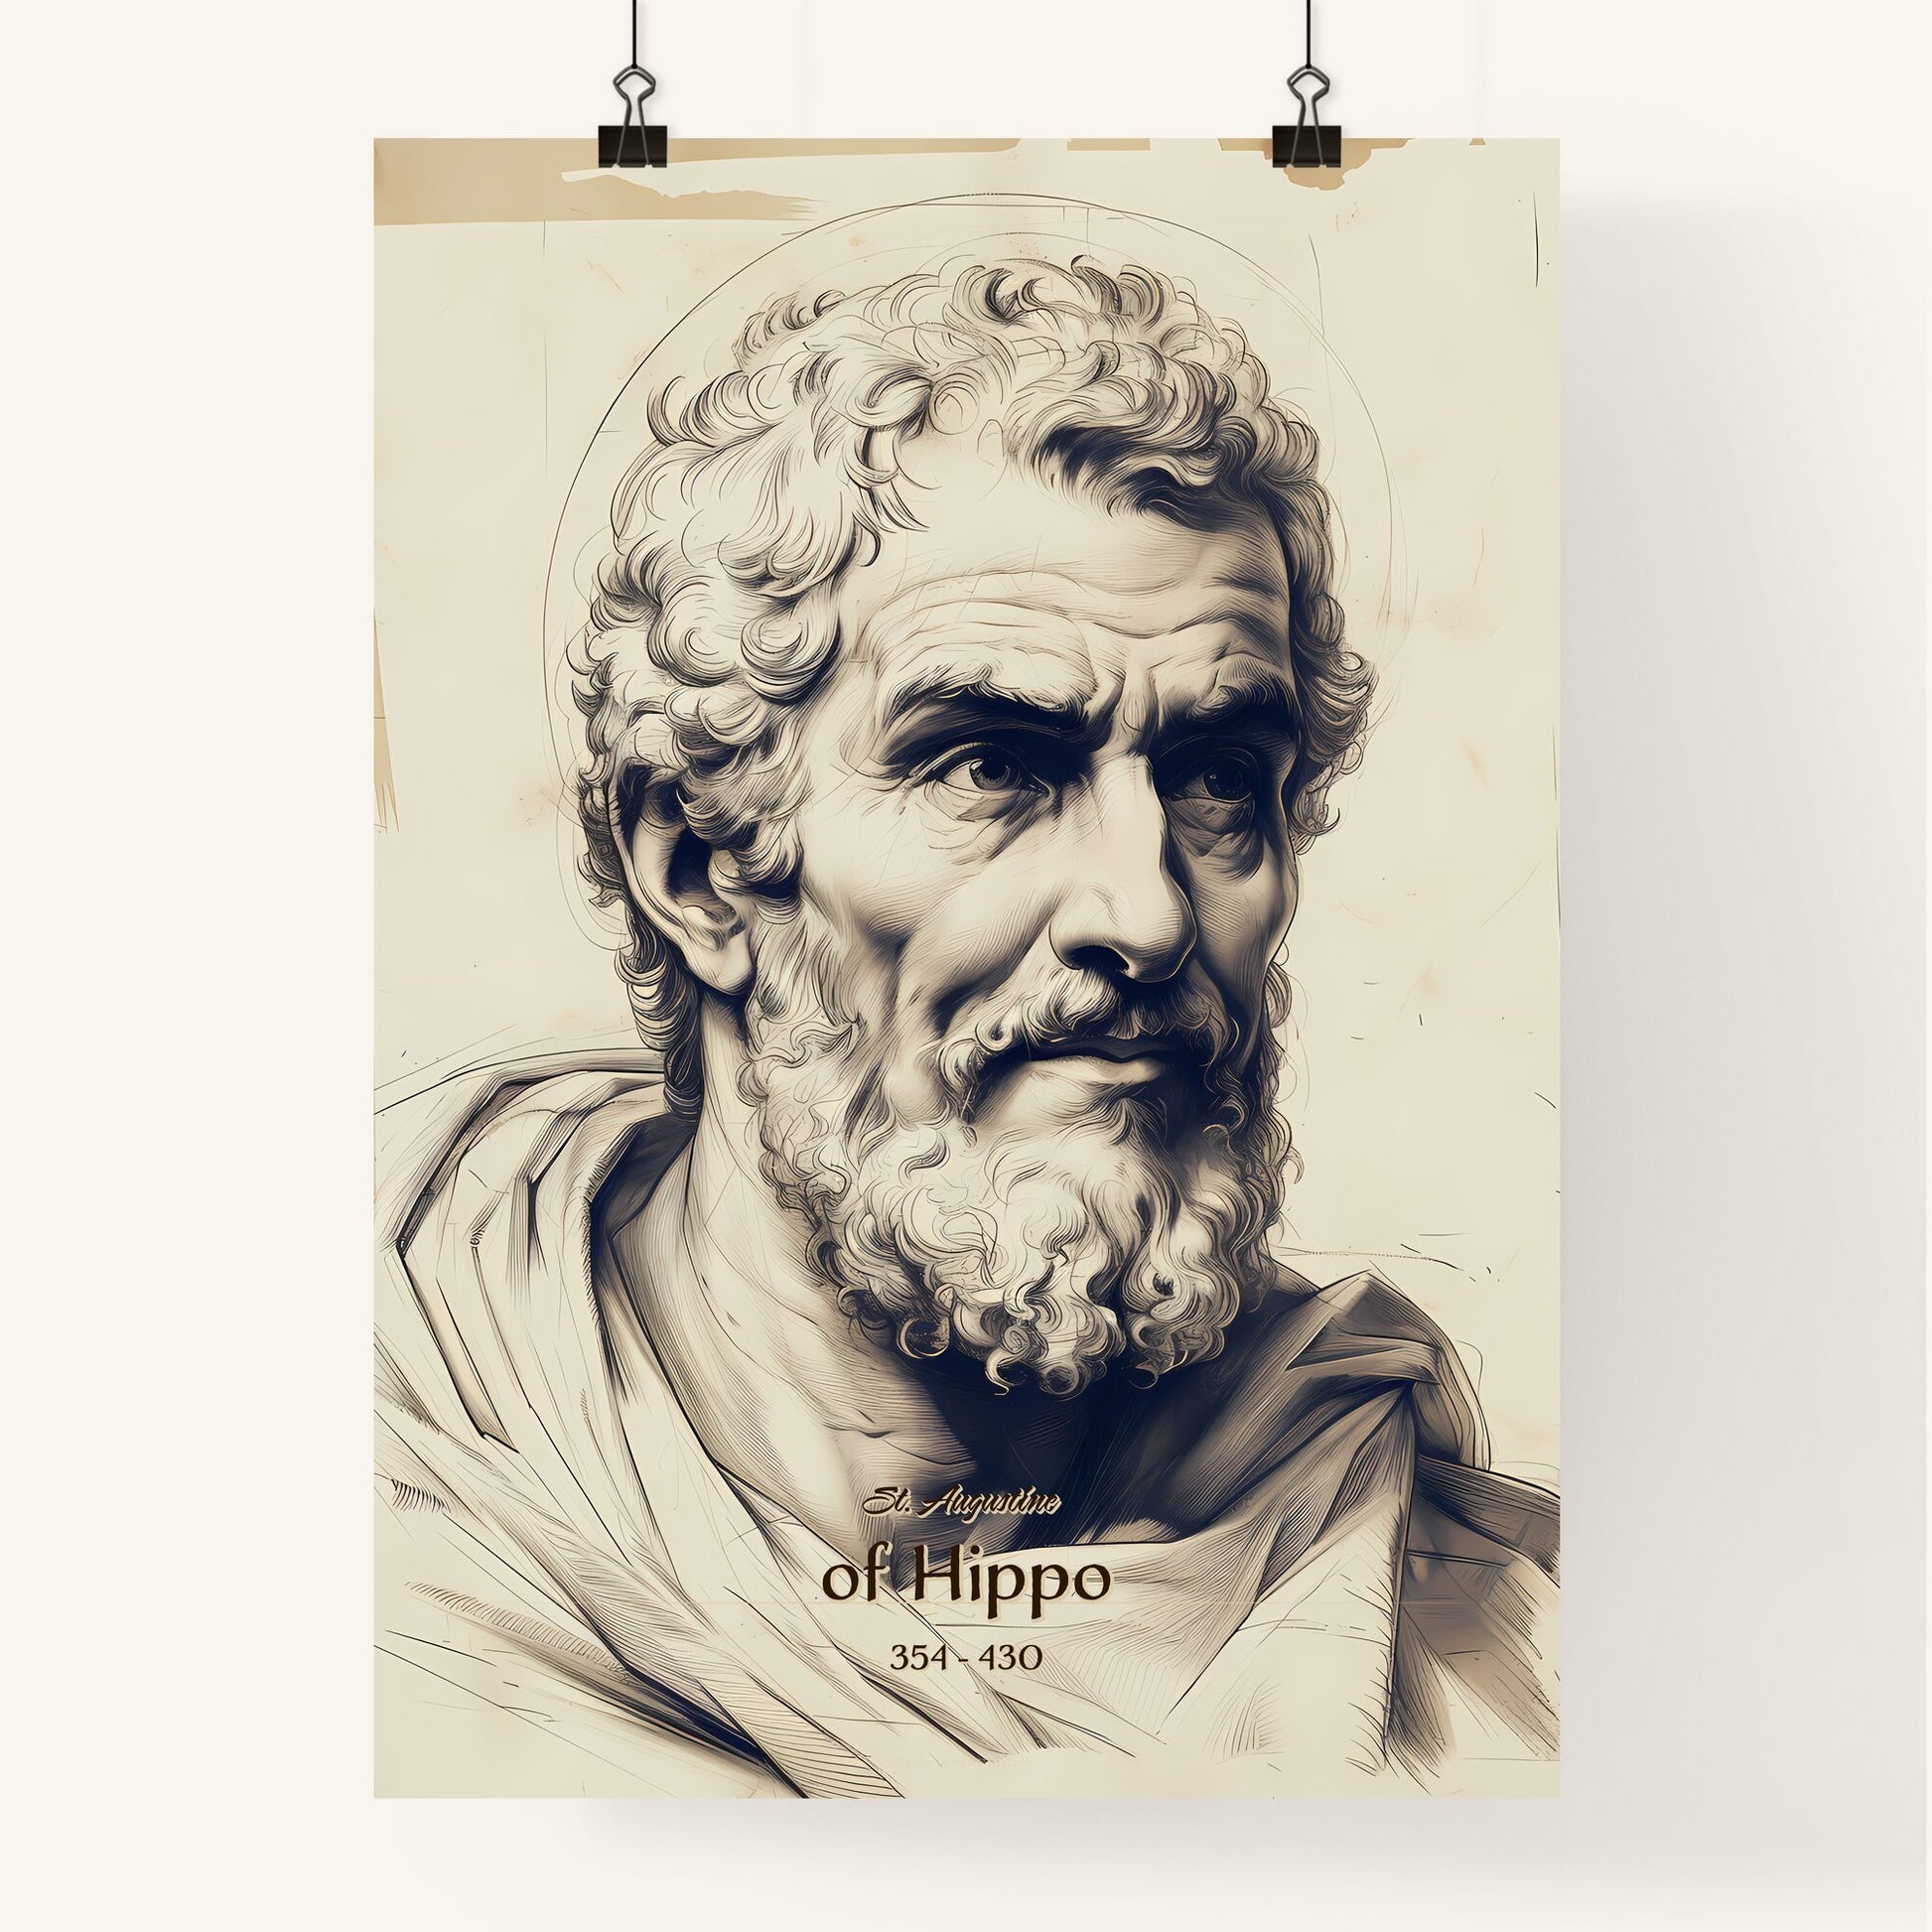 St. Augustine, of Hippo, 354 - 430, A Poster of a drawing of a man with a beard Default Title